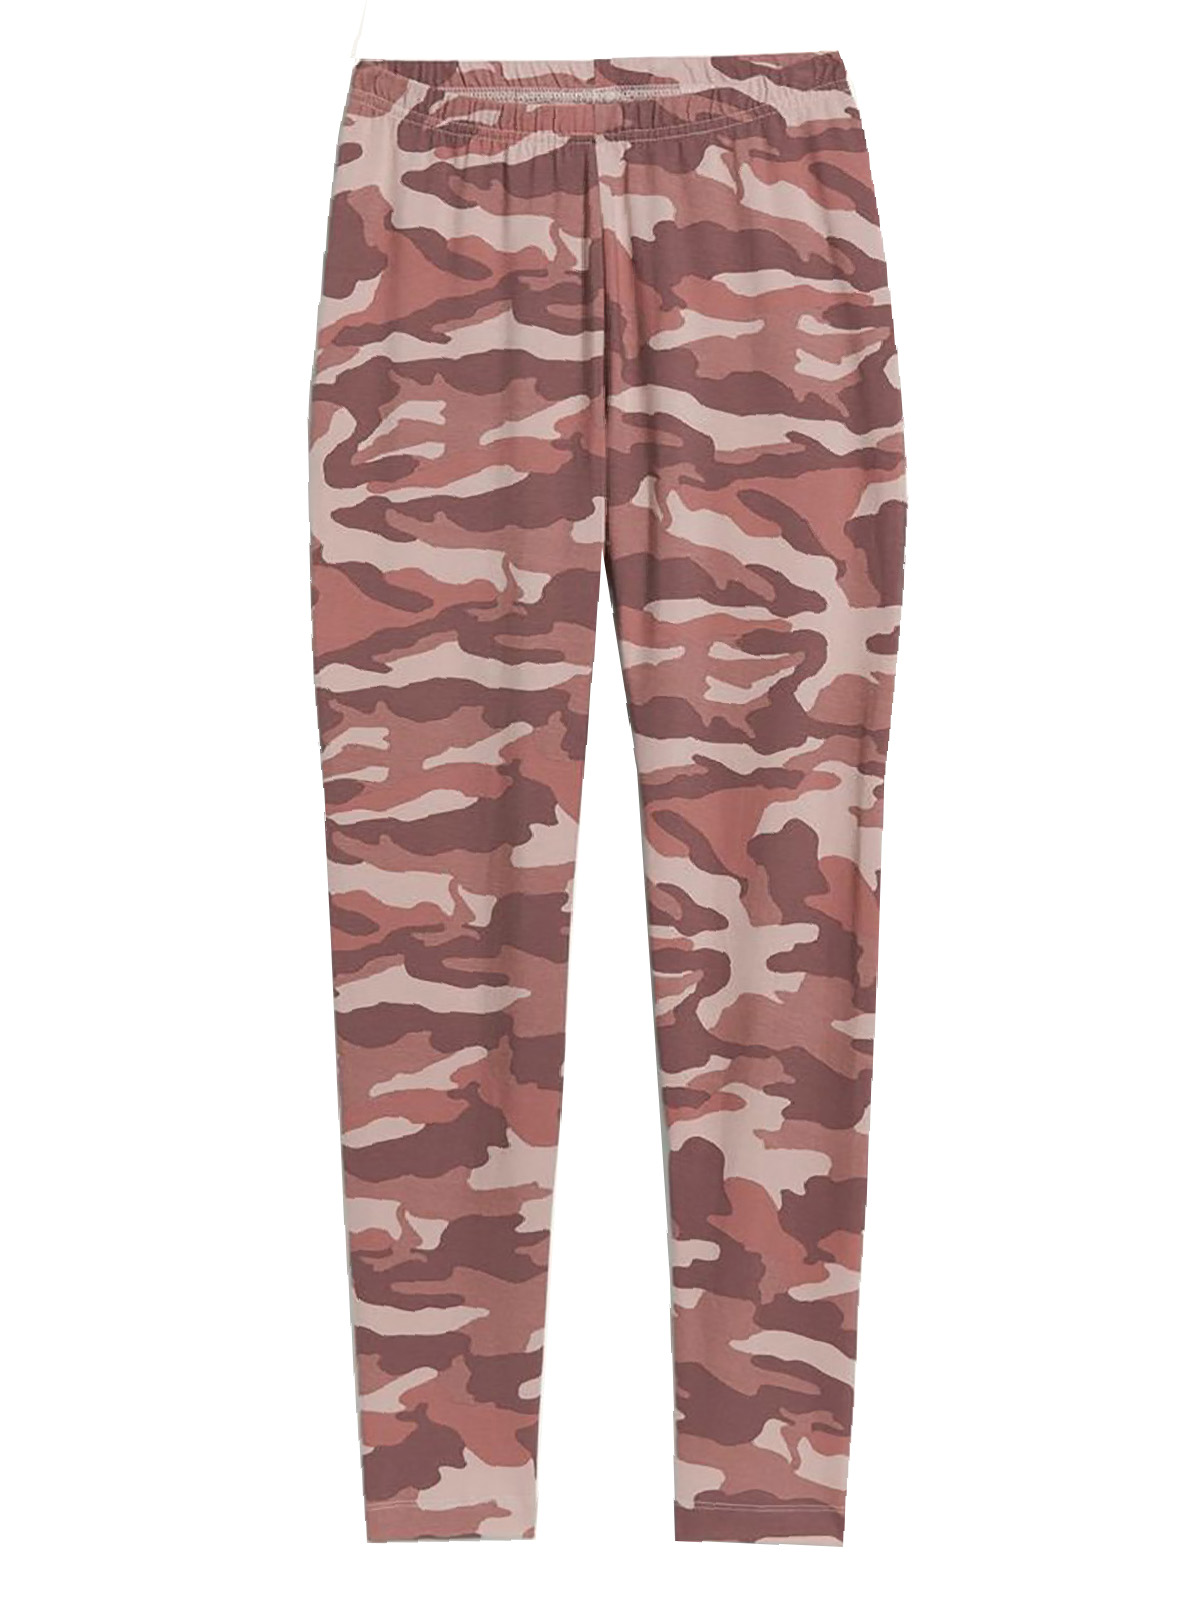 Old Navy Camouflage Leggings Activewear High Rise Stretch Women's